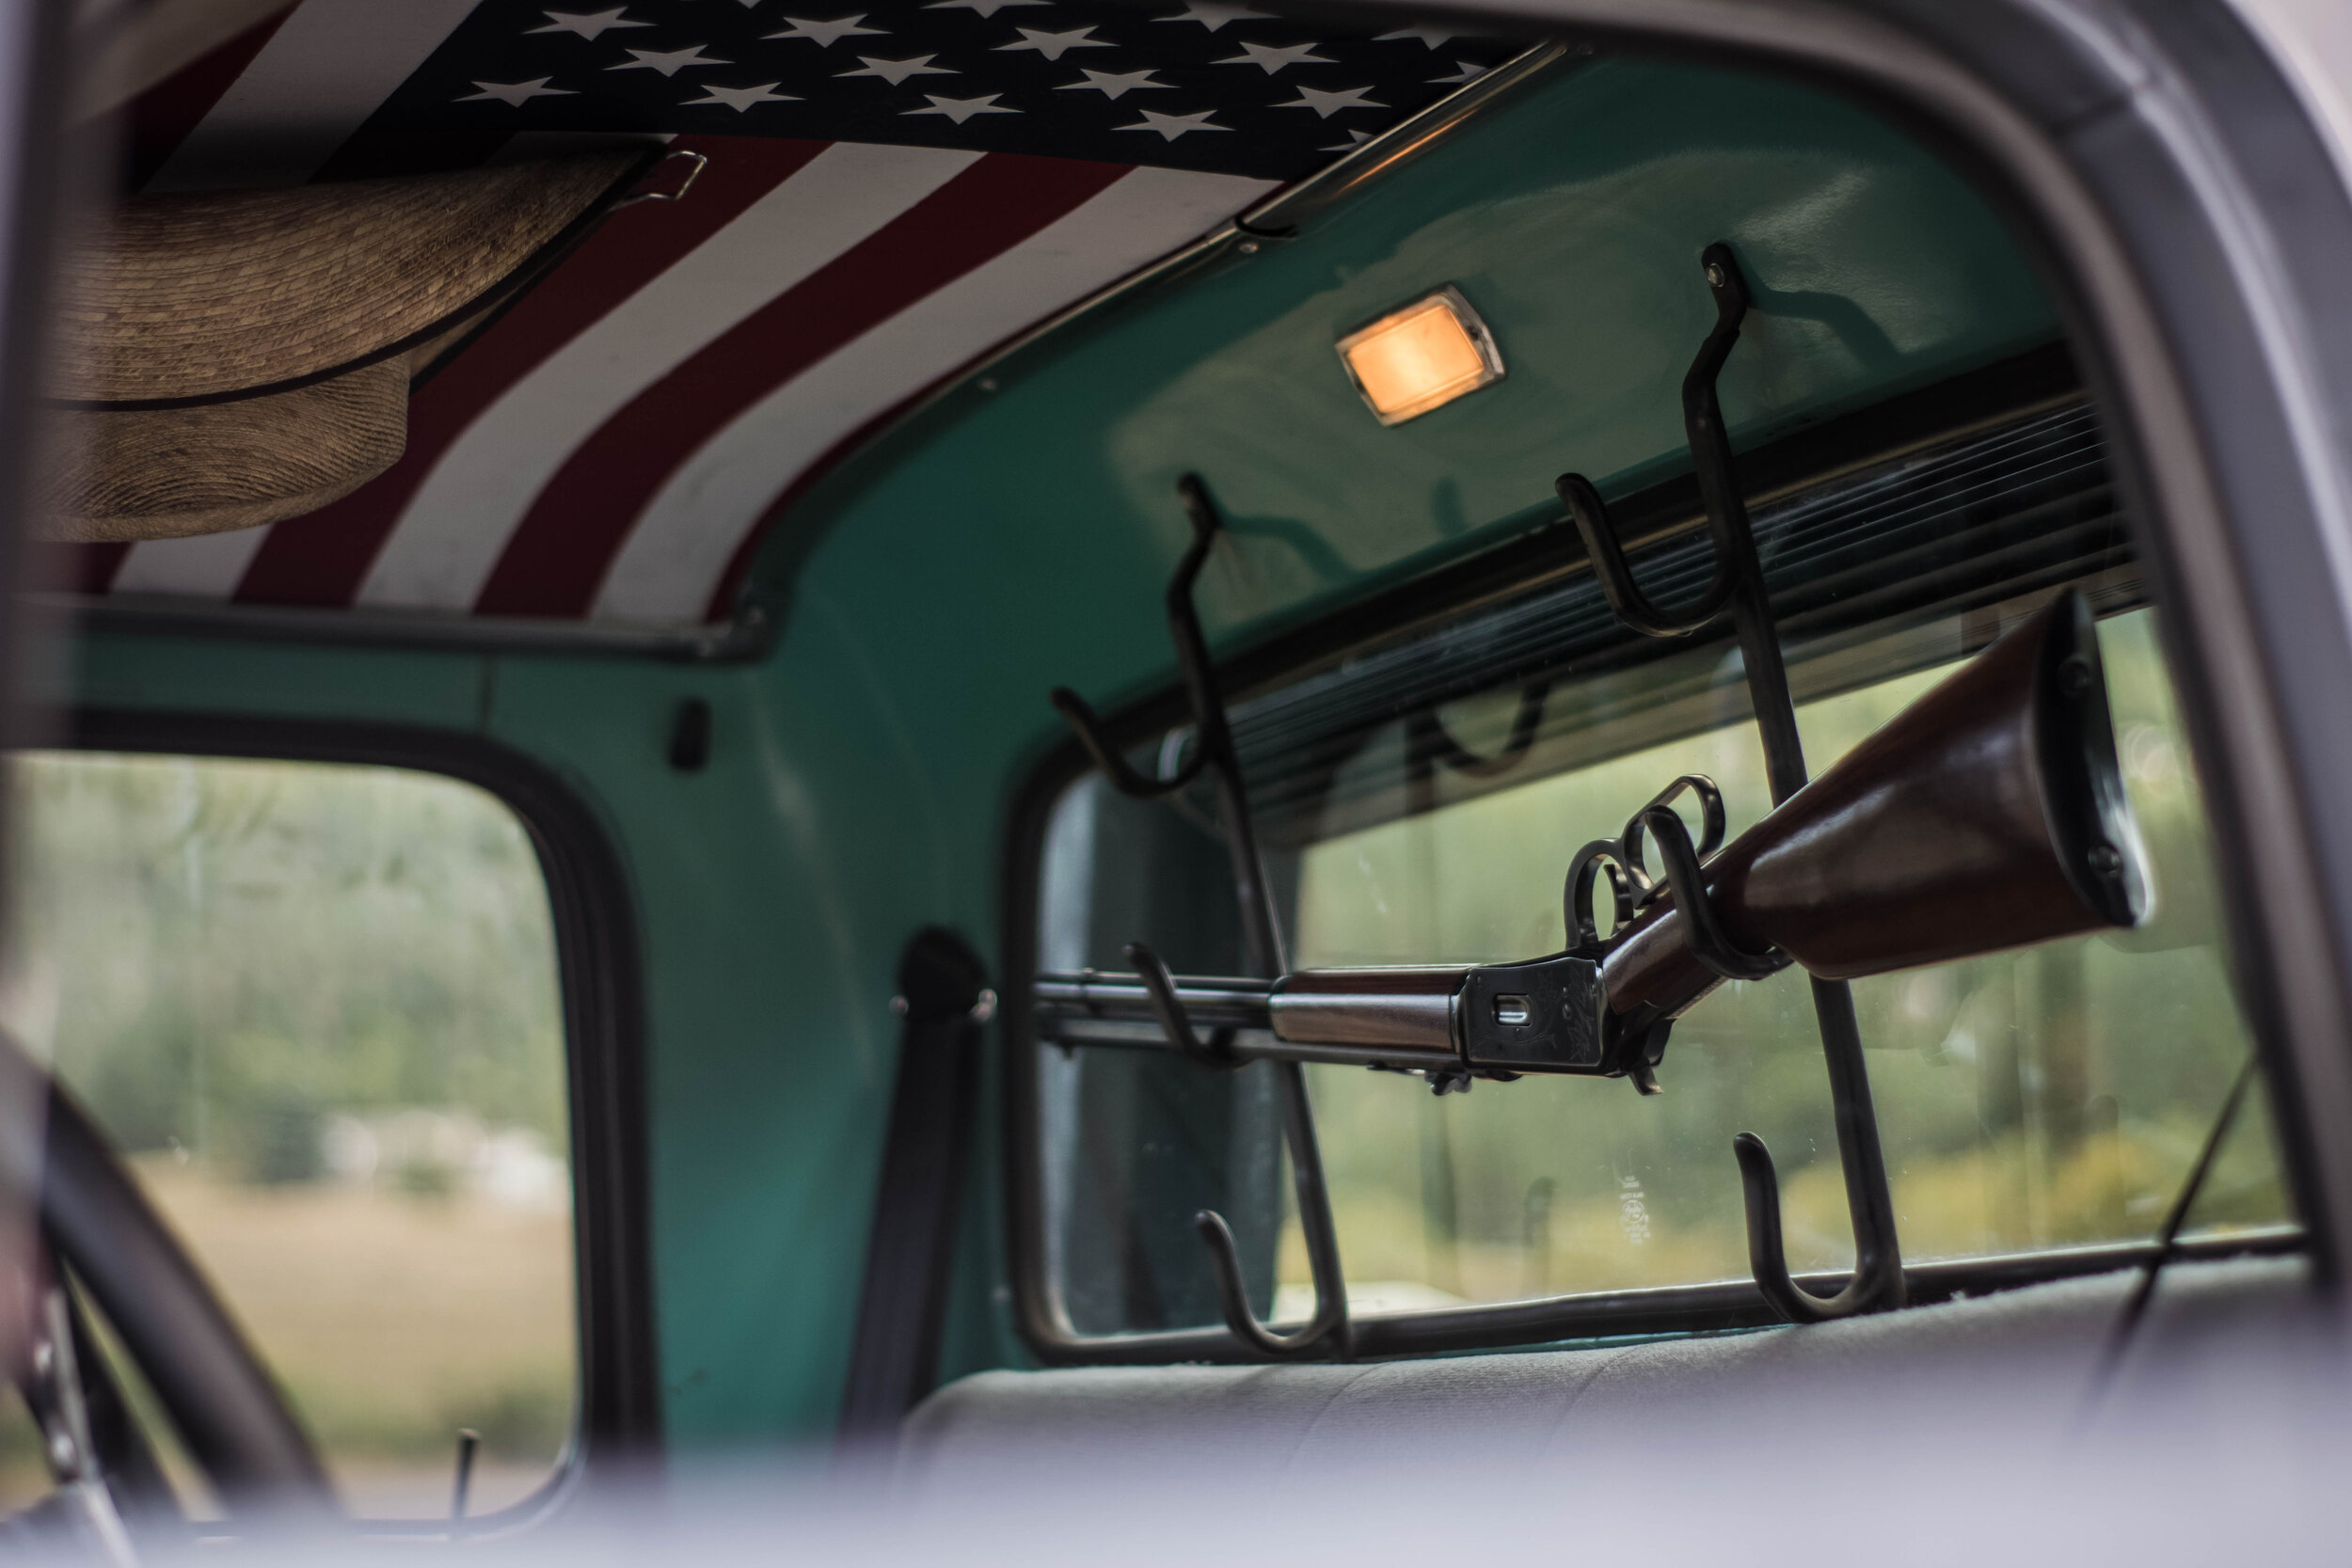  The second thing every farm truck needs… a gun rack. Even better if you have a vintage Winchester lever action to fill it out. My model 94 chambered in 30-30 fit the bill well. 